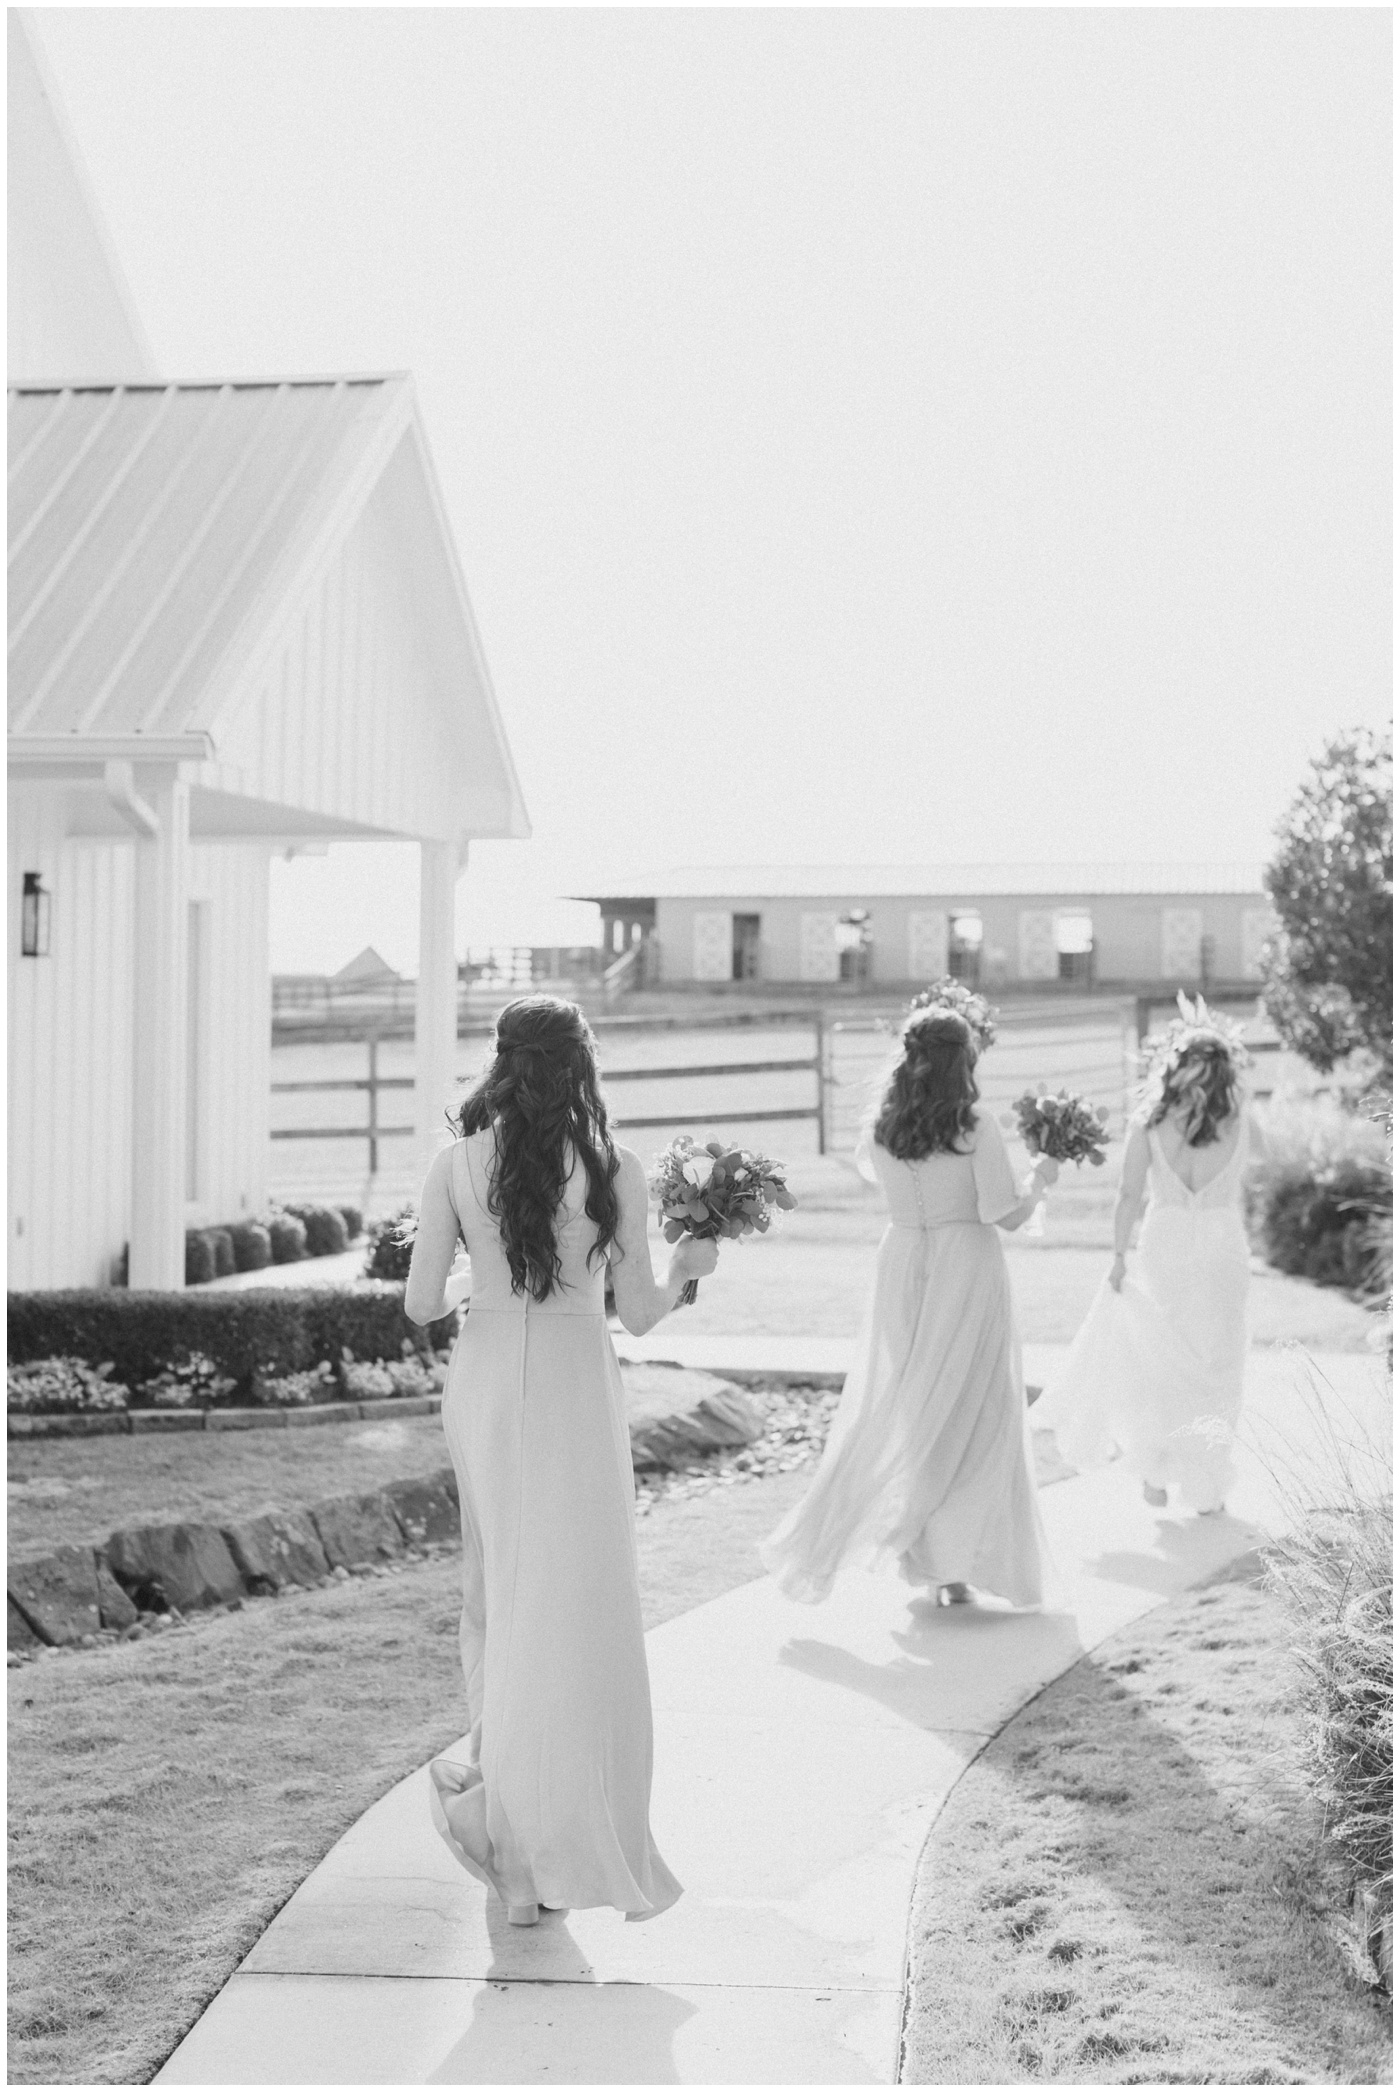 the bridesmaids and bride walk toward the chapel as they prepare for the ceremony to begin